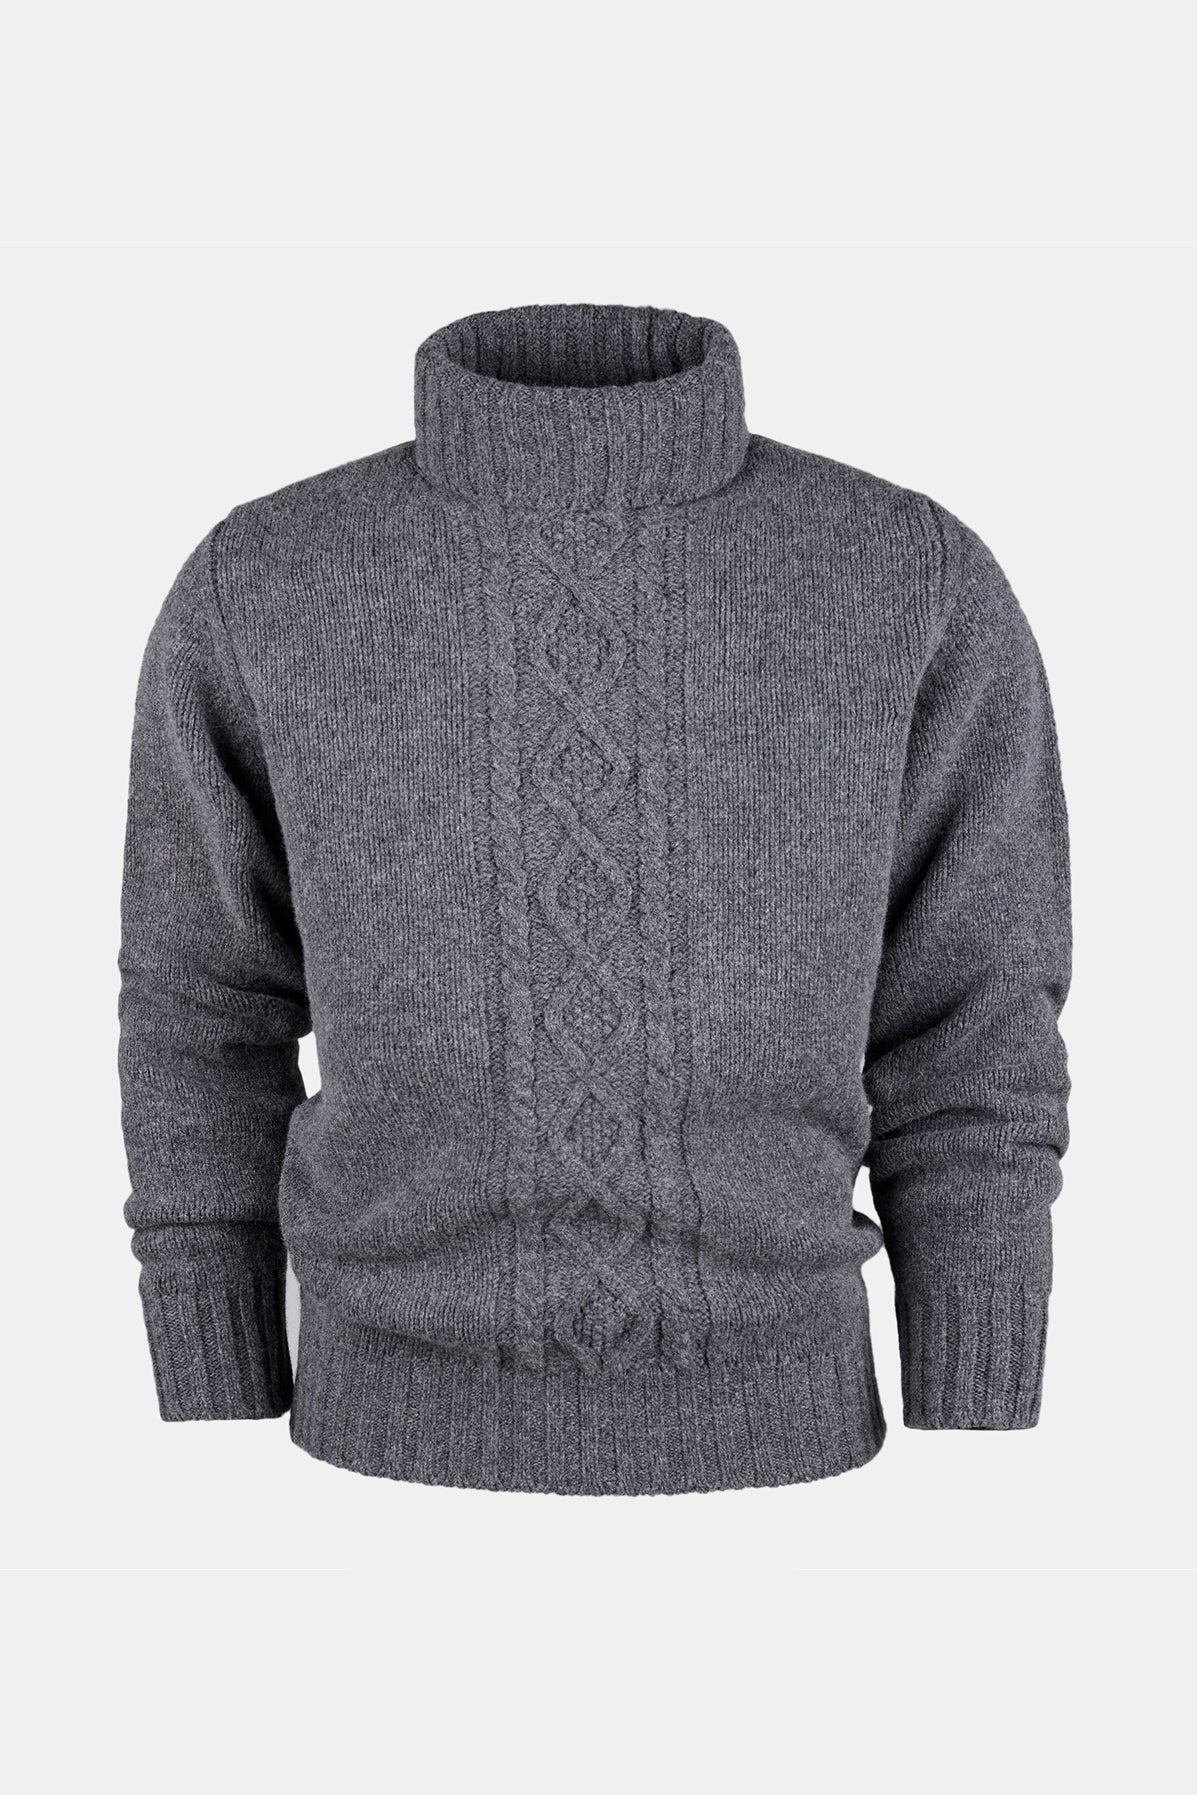 Men's 6ply Cable Knit Roll Neck - Grey - Community Clothing